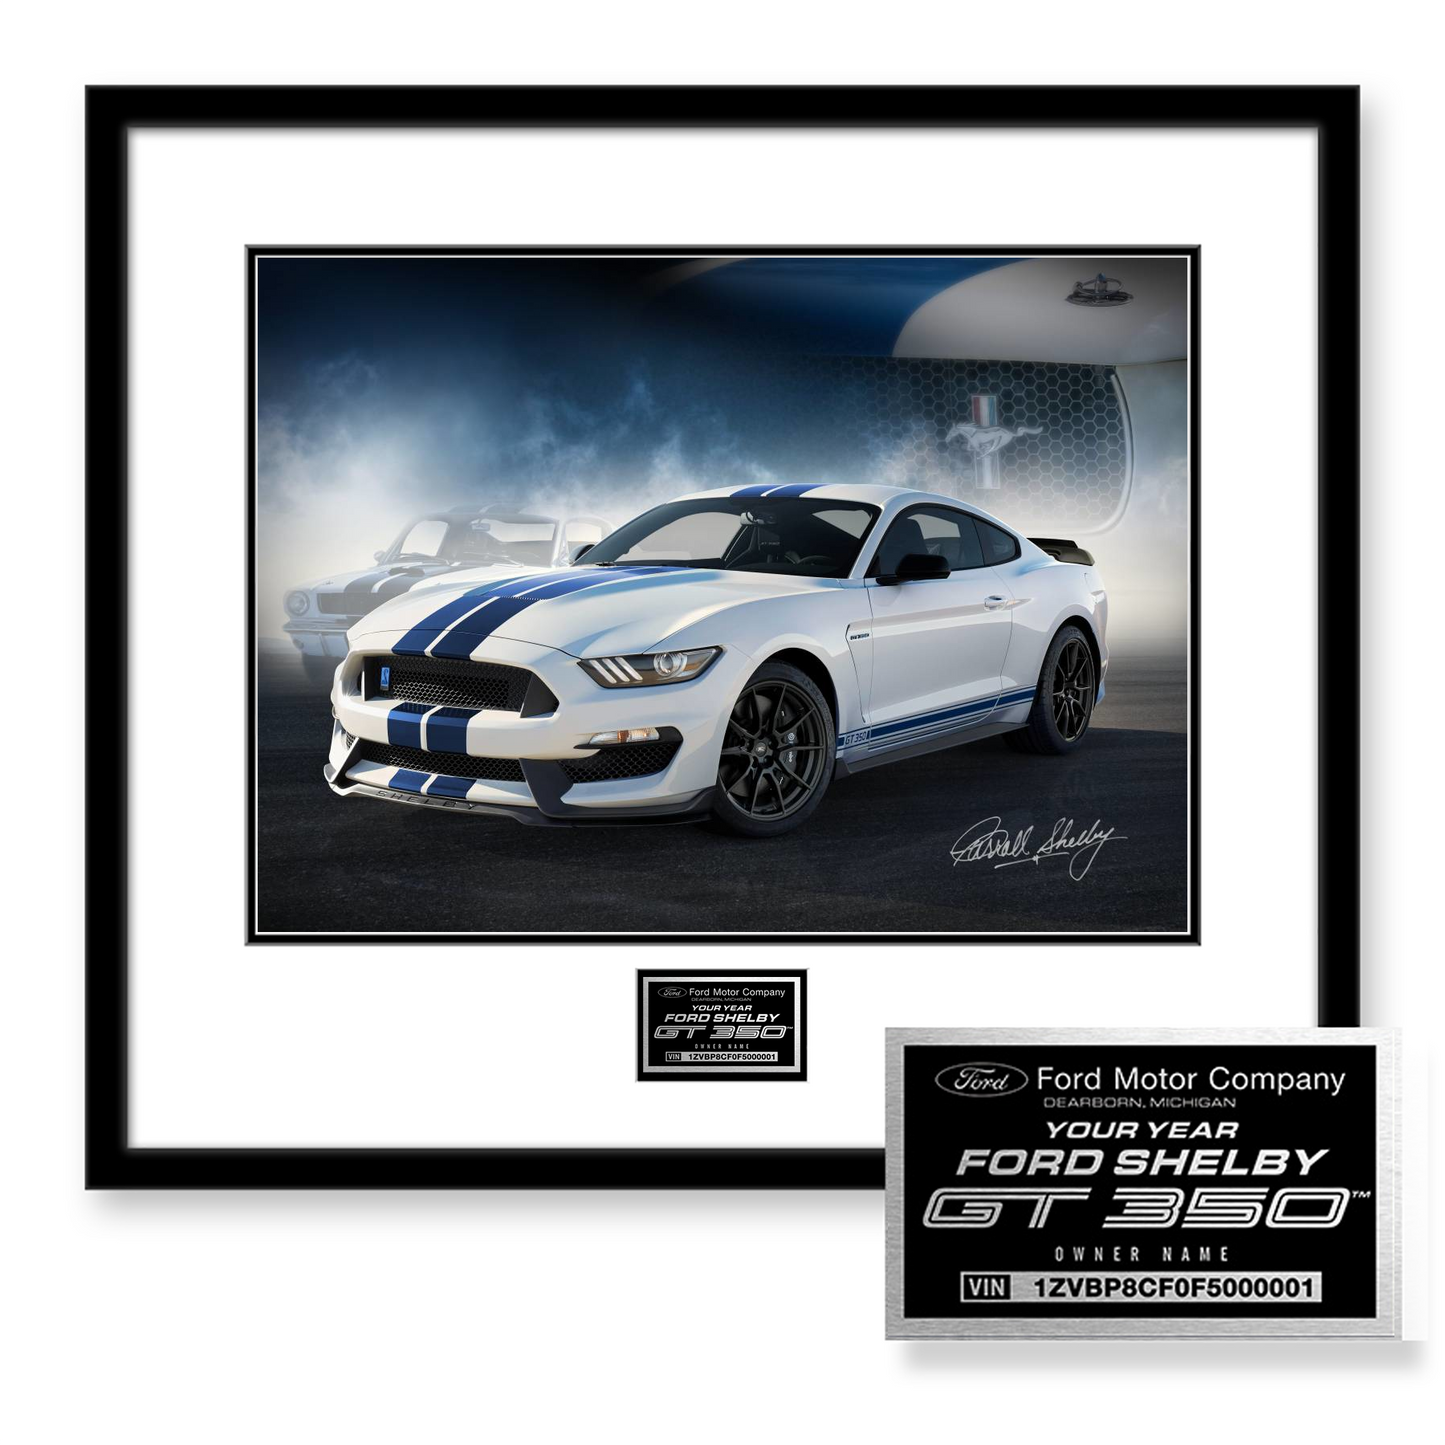 BUILD MY 2015-2020 SHELBY GT350 OWNERS EDITION